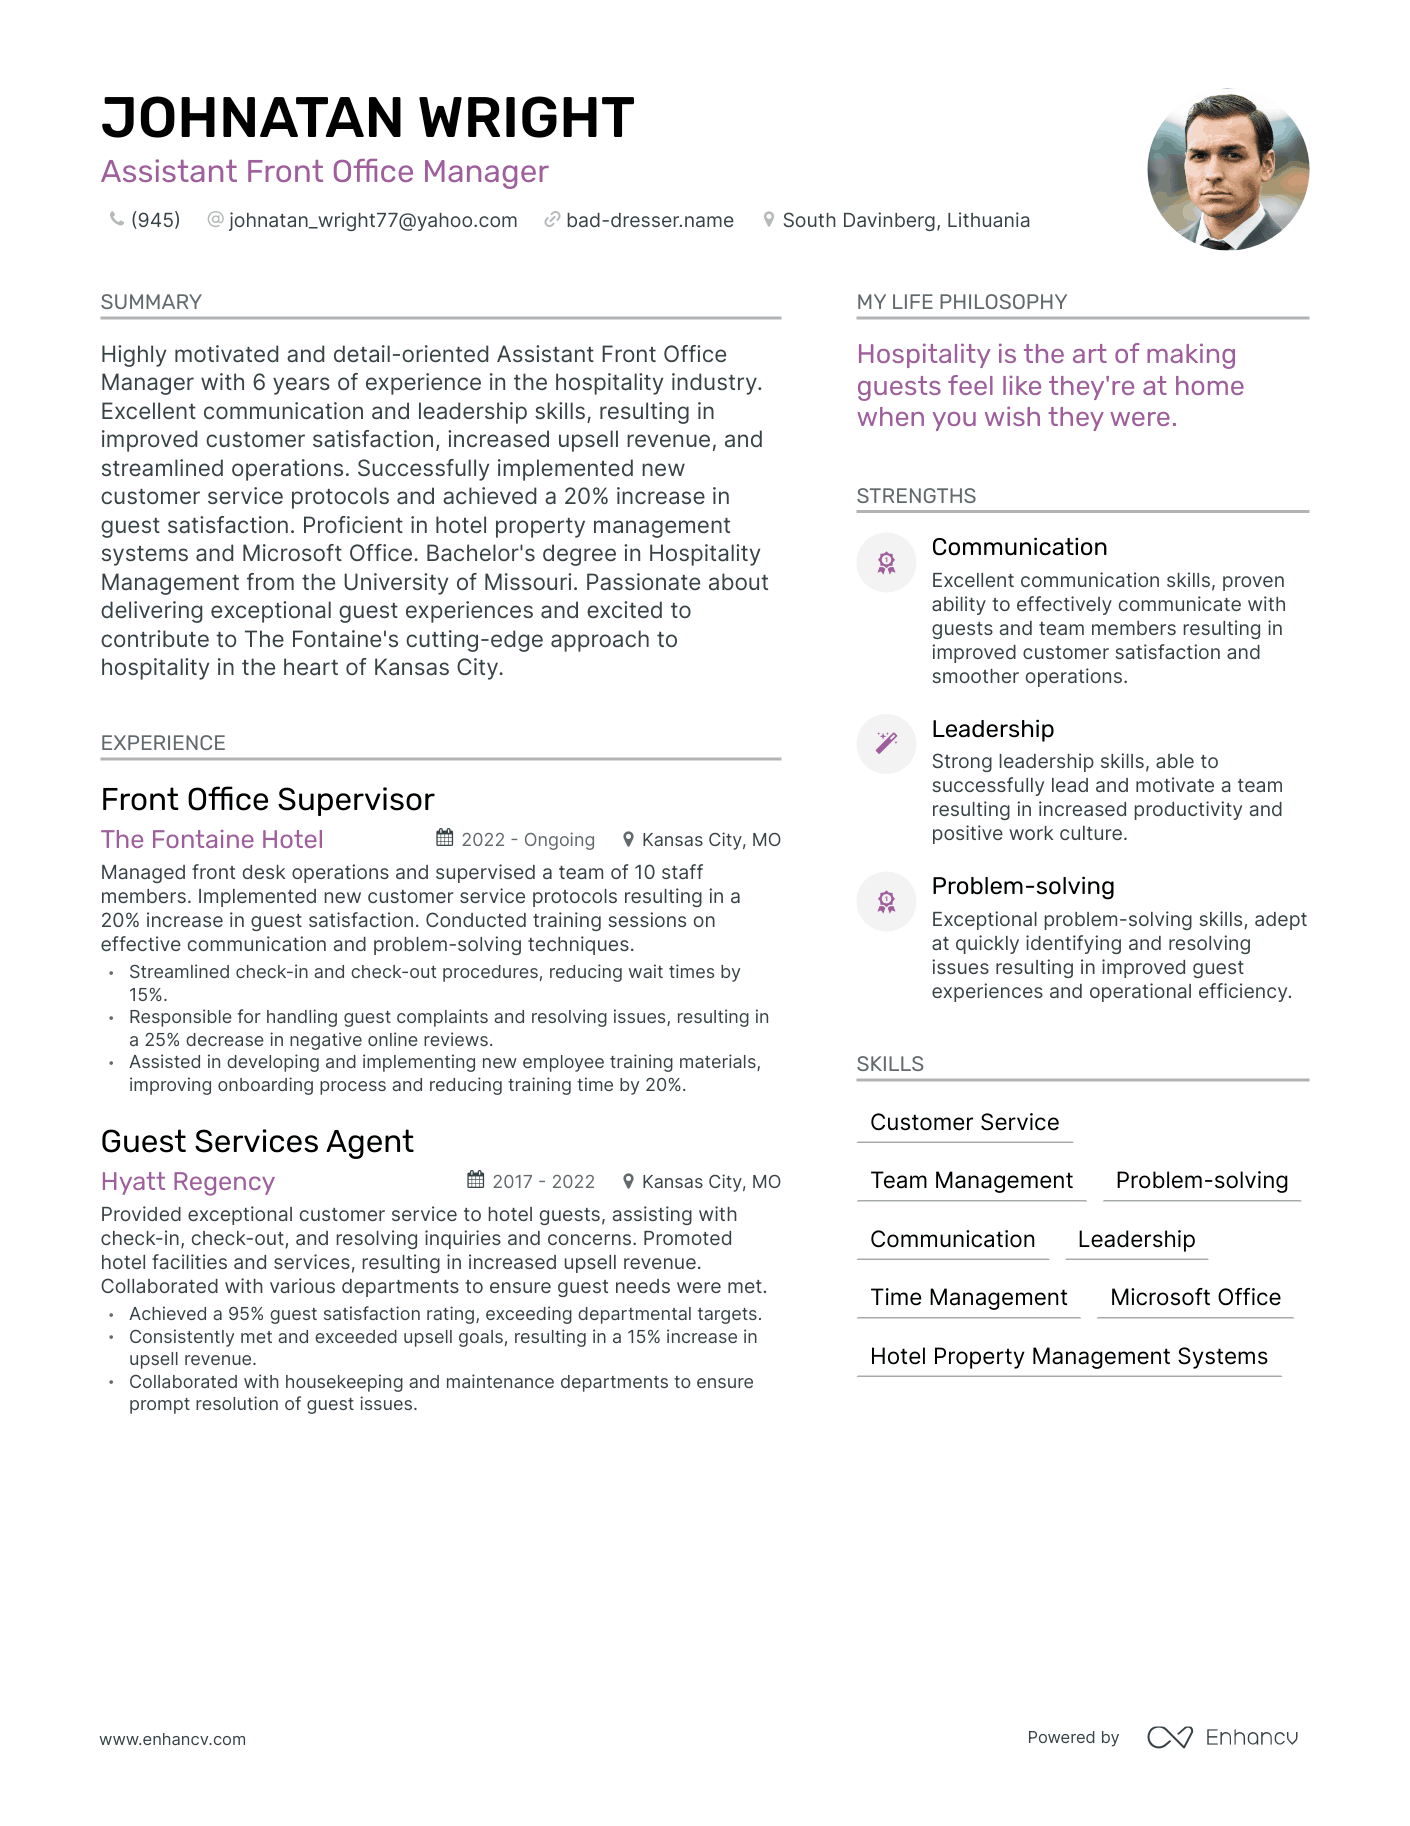 Assistant Front Office Manager resume example